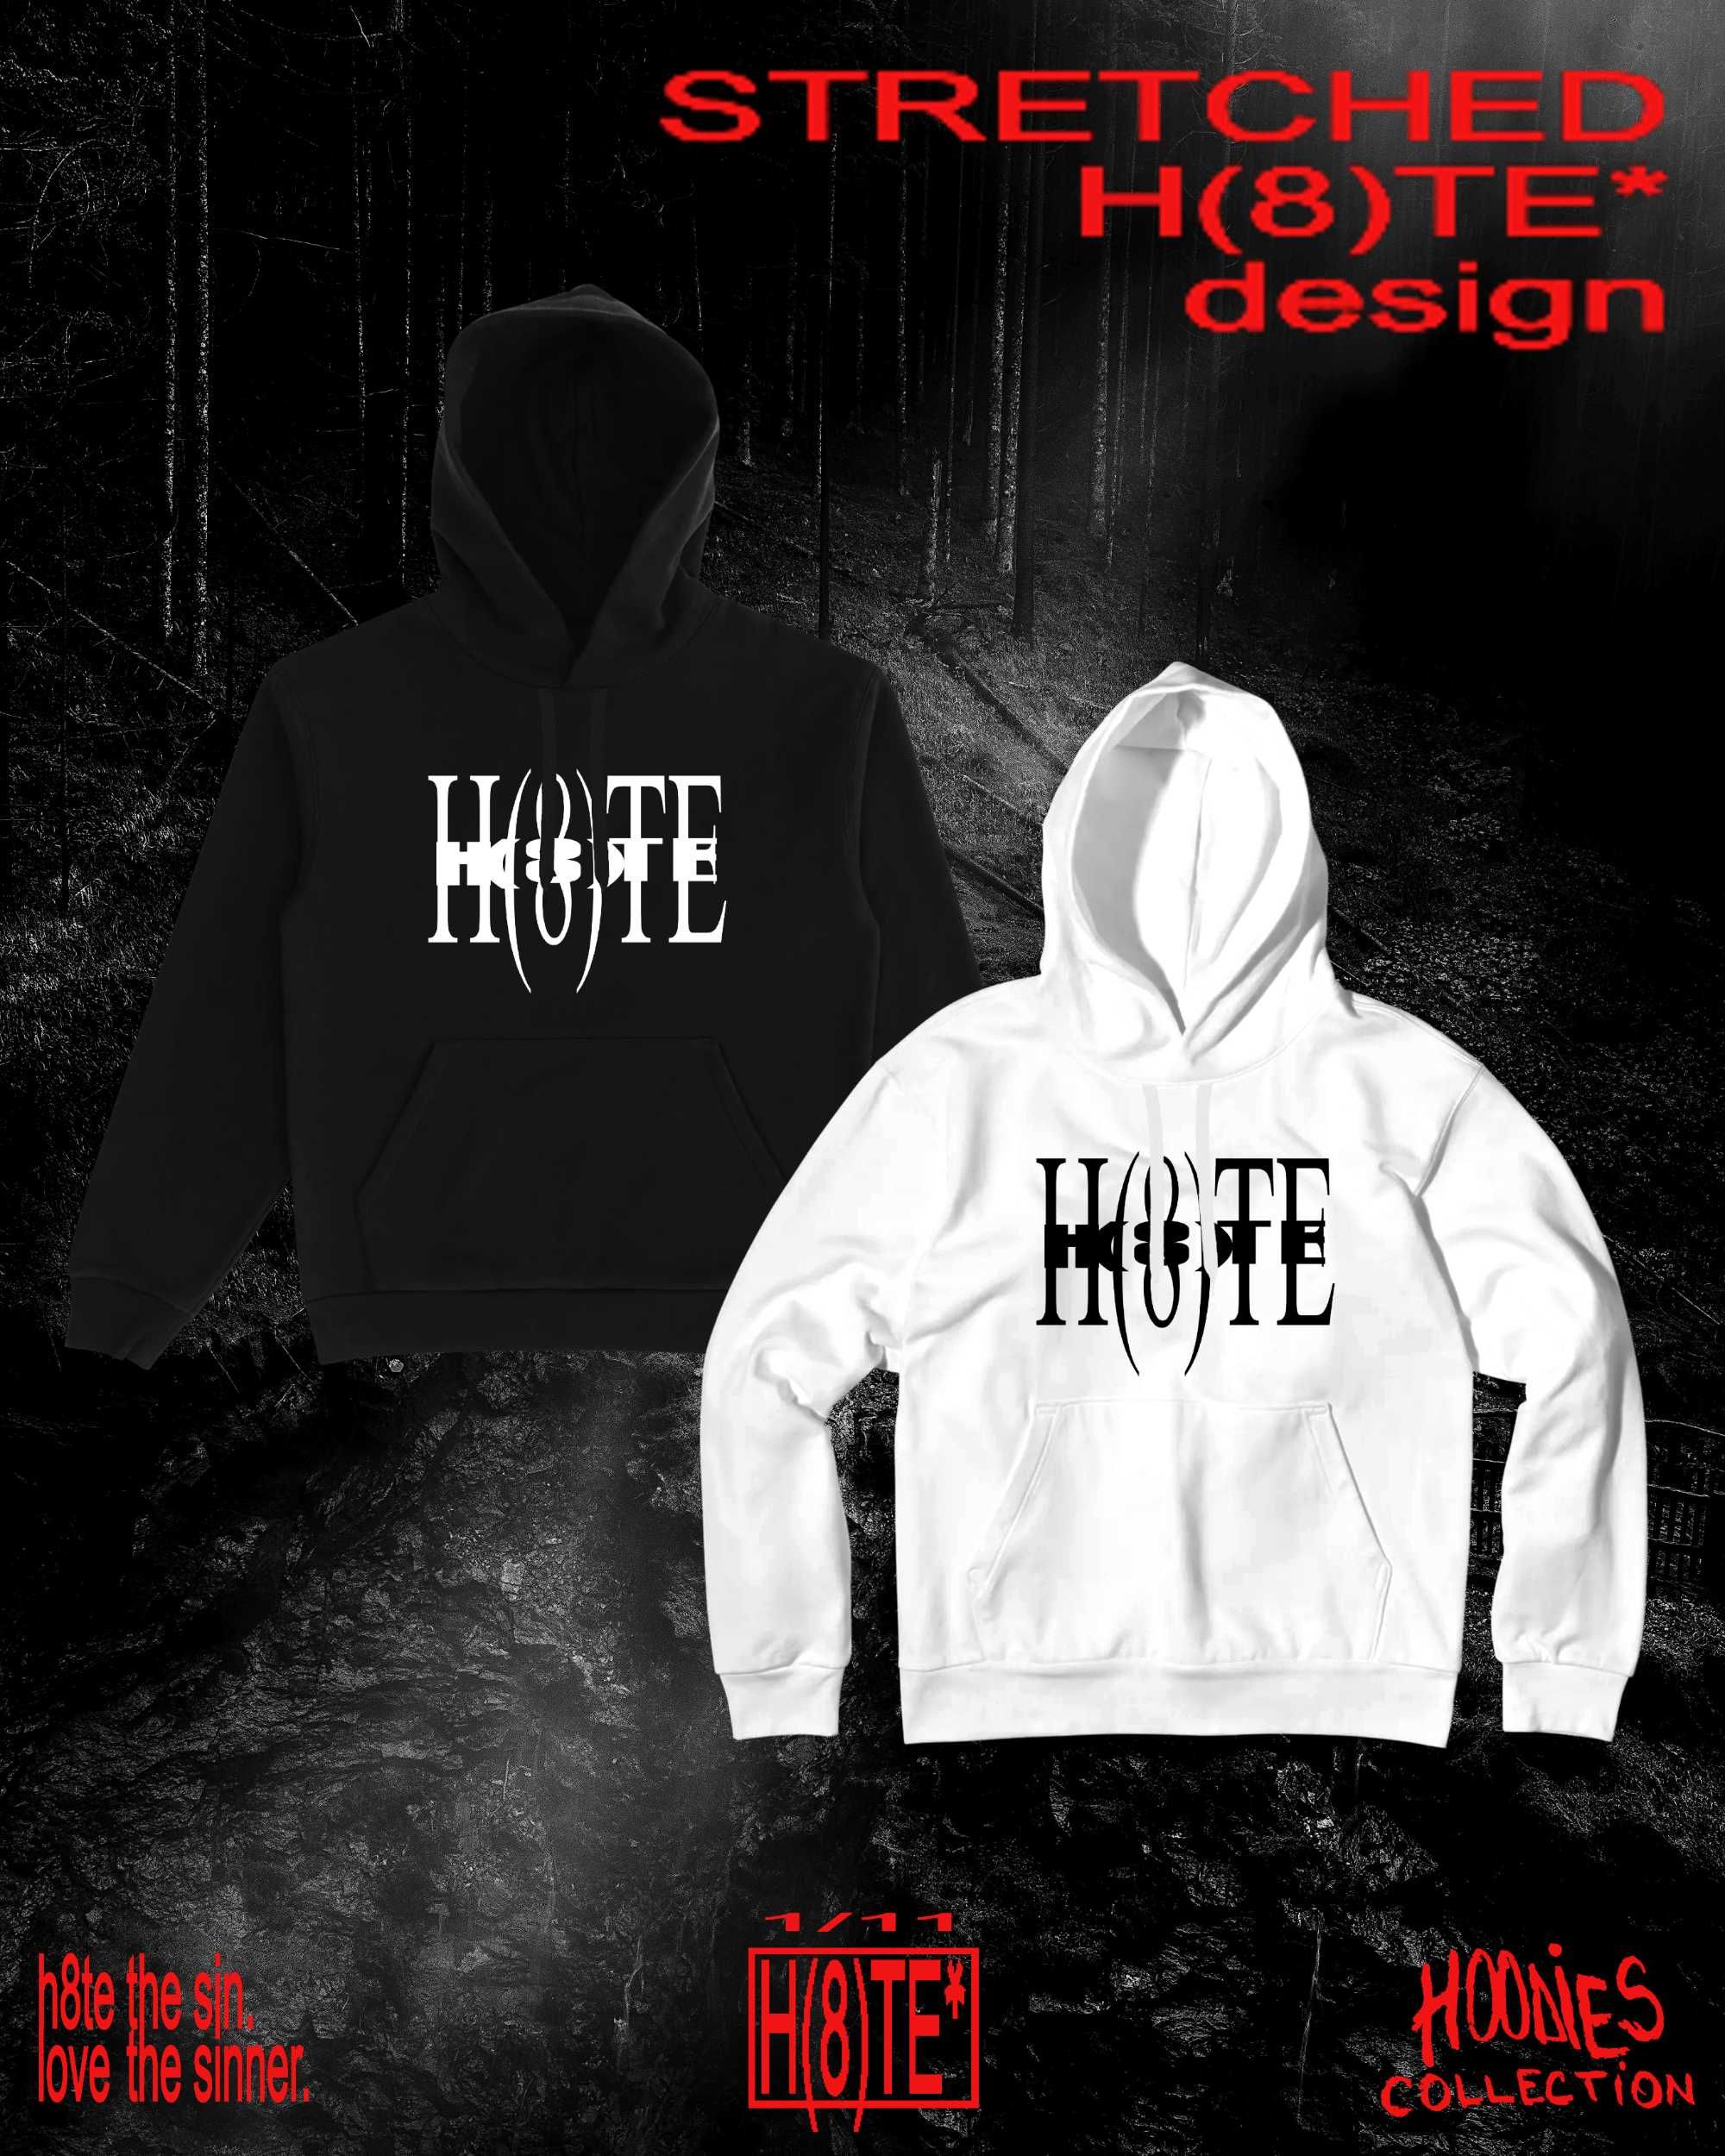 H(8)TE* - hoodie collection.